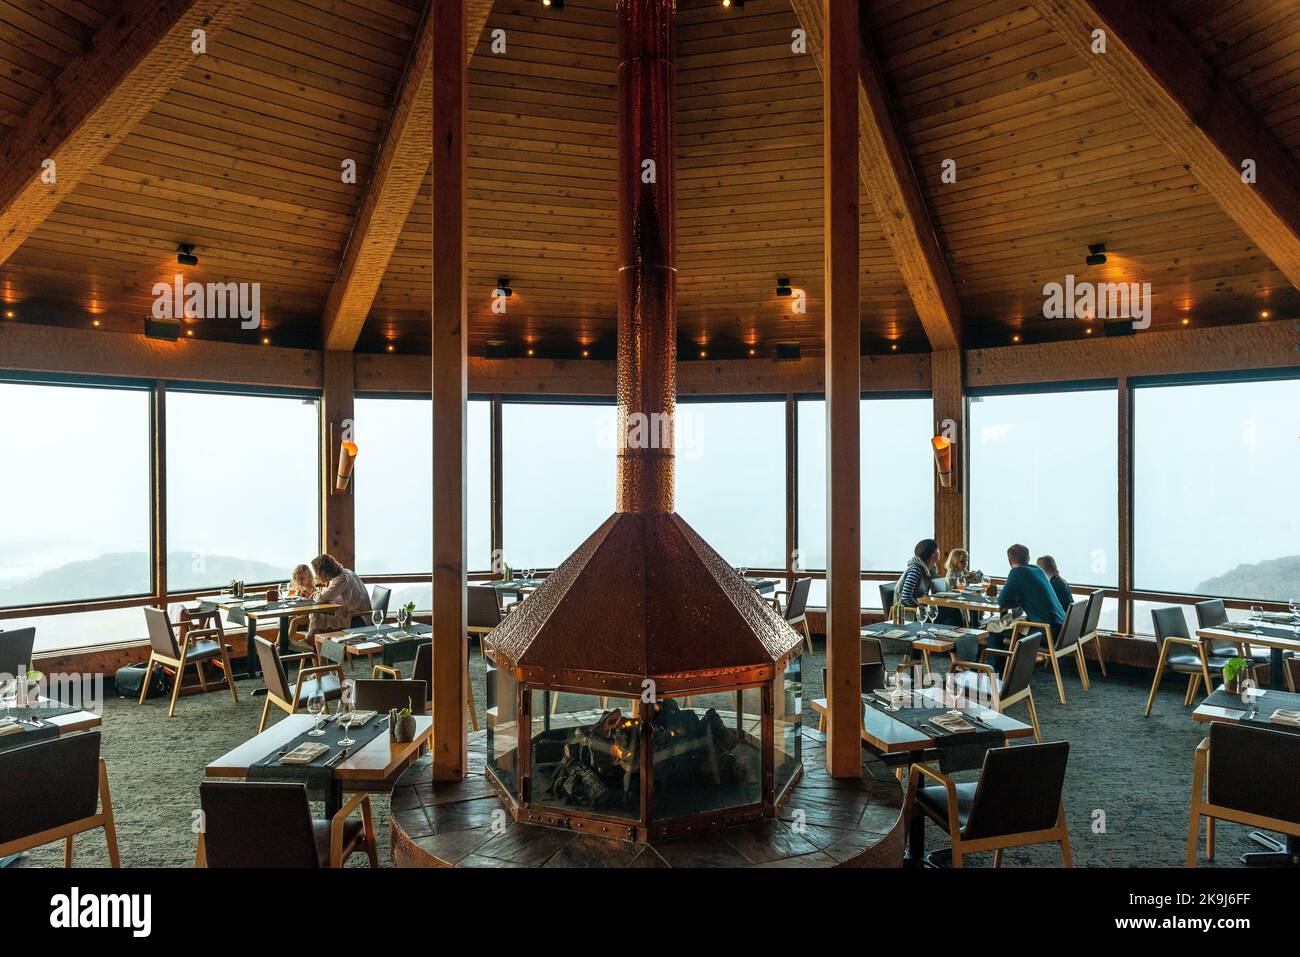 Interior of The Pointe restaurant with people, Wickaninnish Inn, Tofino, Vancouver Island, Canada. Stock Photo